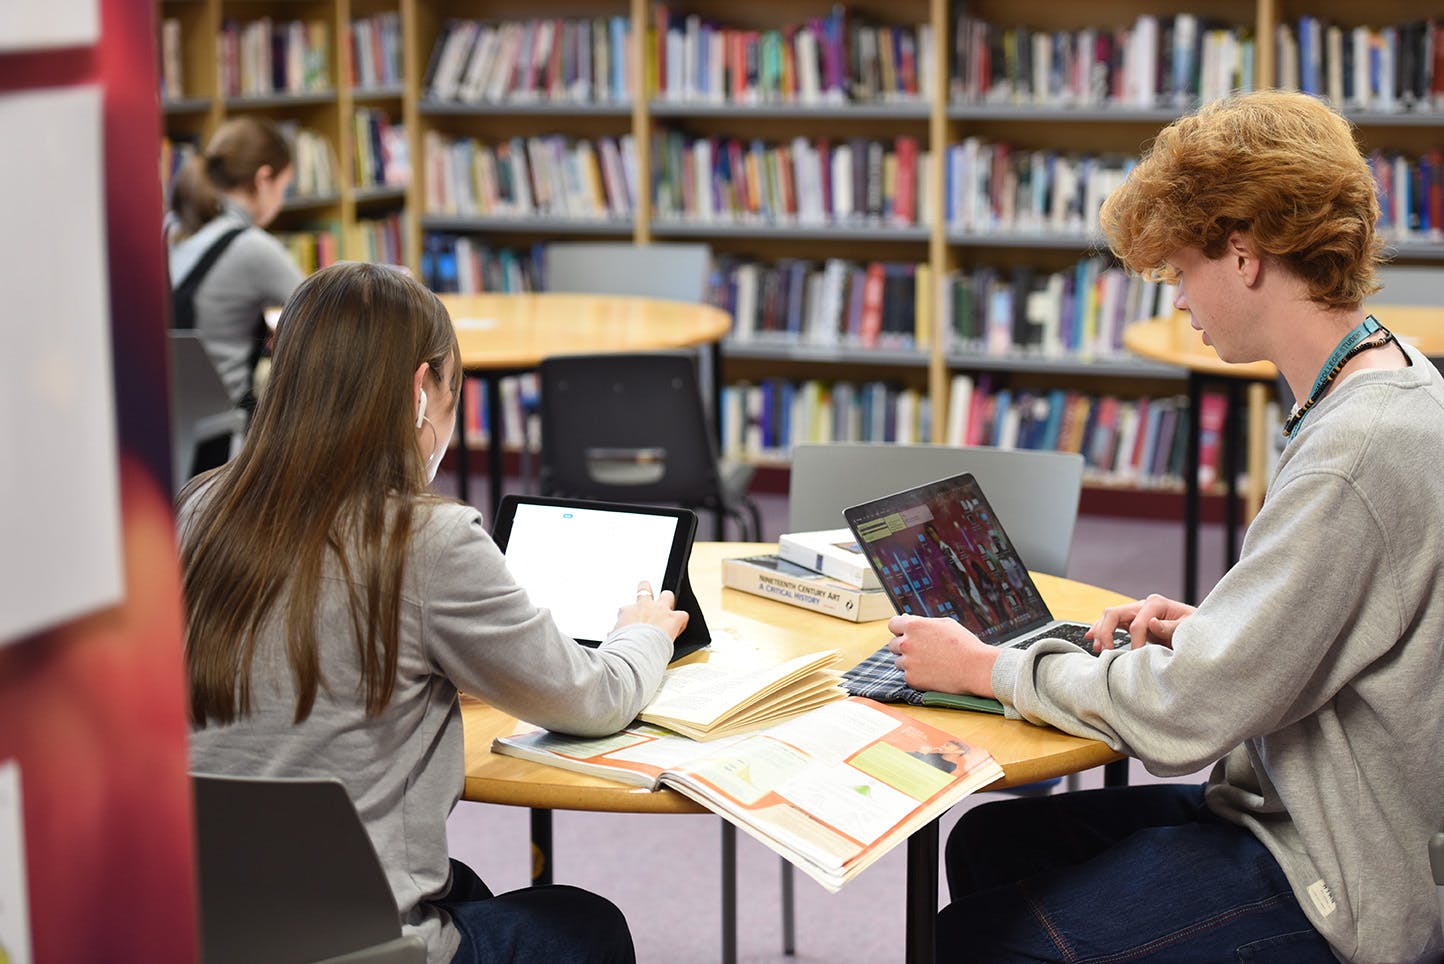 Two students working on their tablets in the library